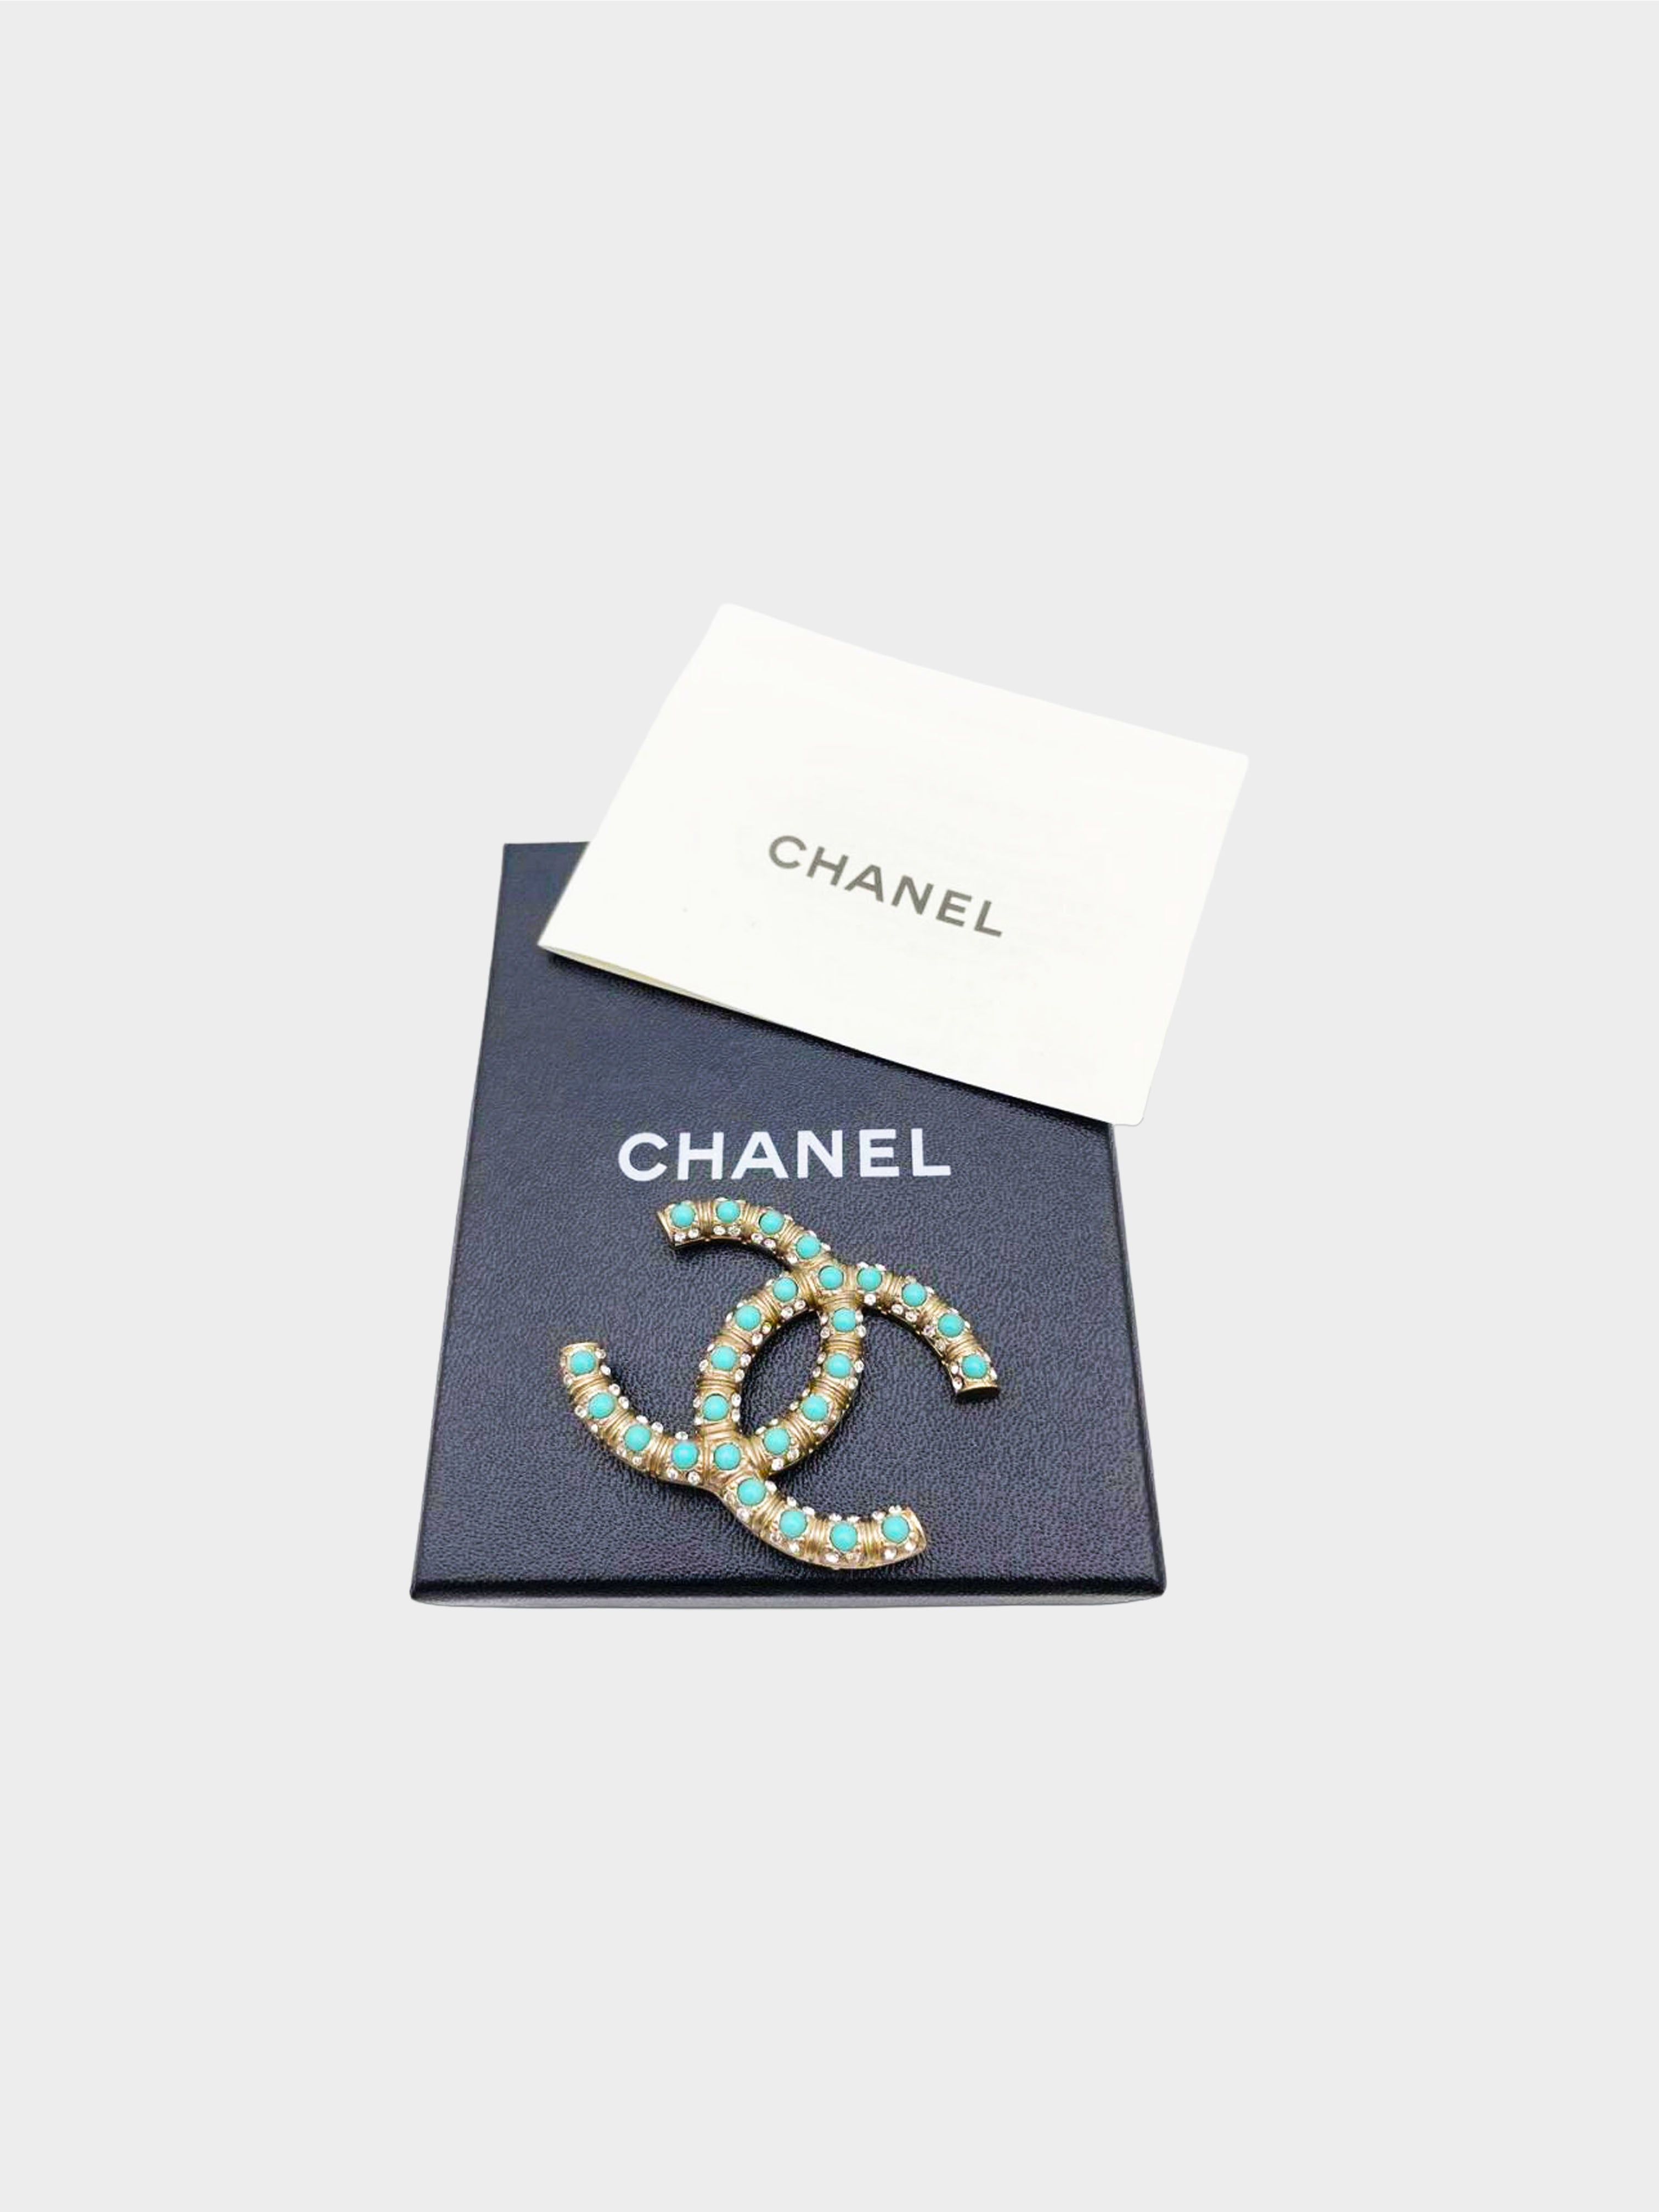 Chanel 2008 Champagne Gold CC Turquoise Studded Rhinestone Brooch